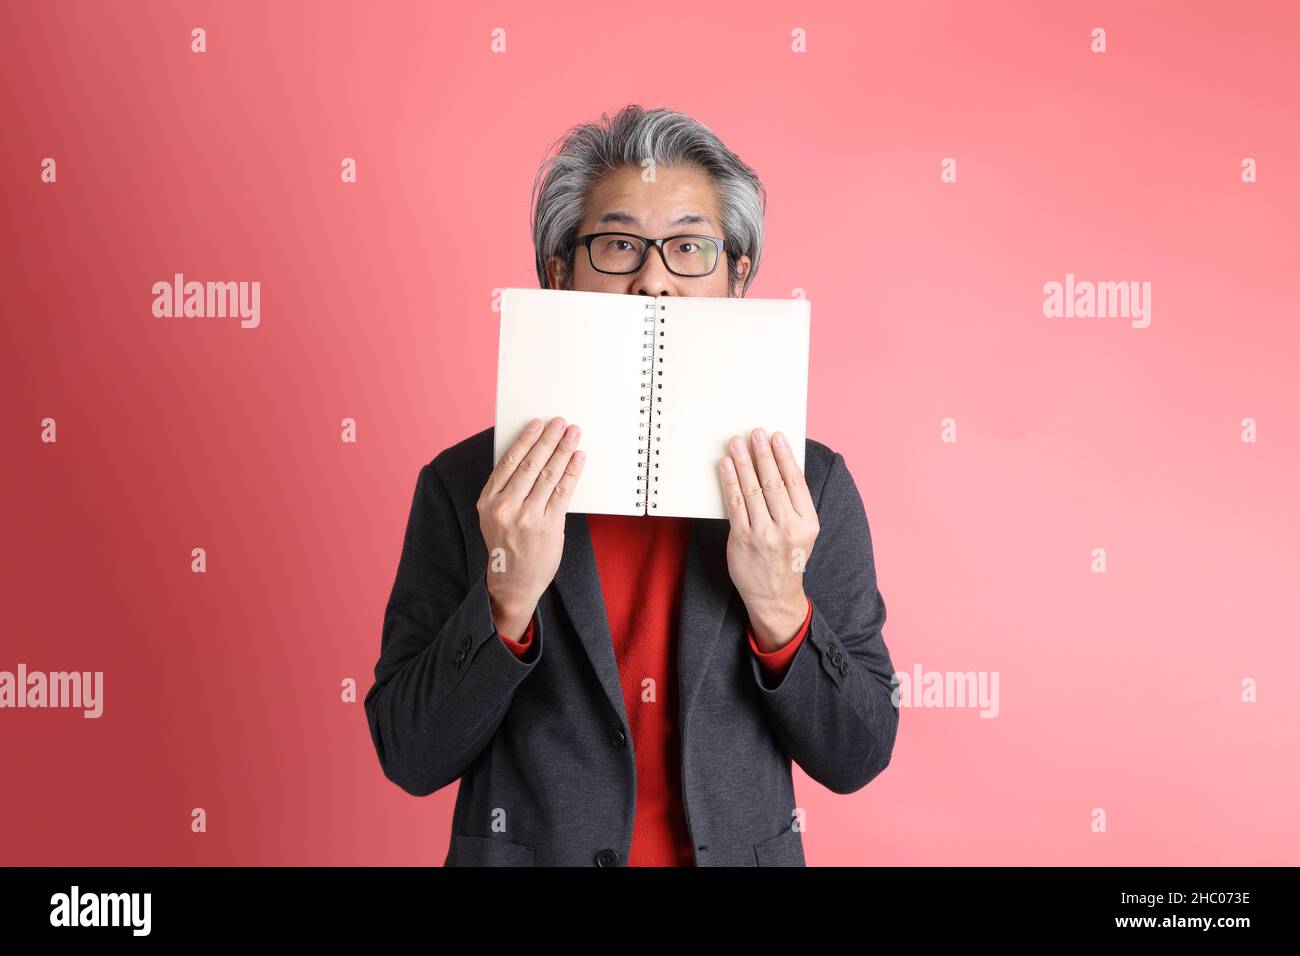 The Asian man standing on the pink background. Stock Photo